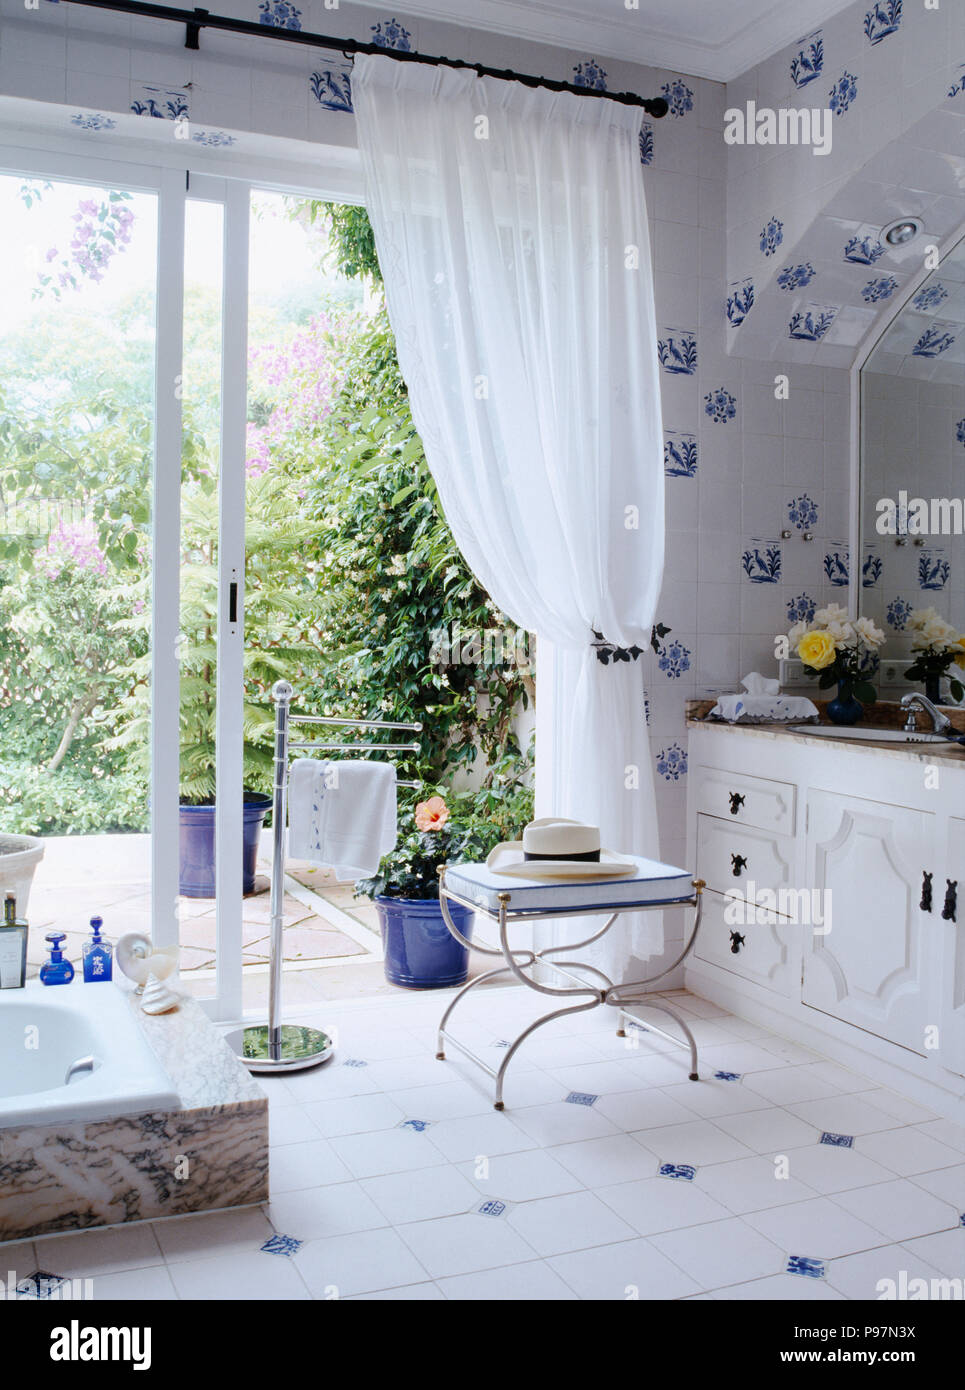 Blue+white ceramic tiled bathroom with white voile curtains on glass doors  to patio Stock Photo - Alamy